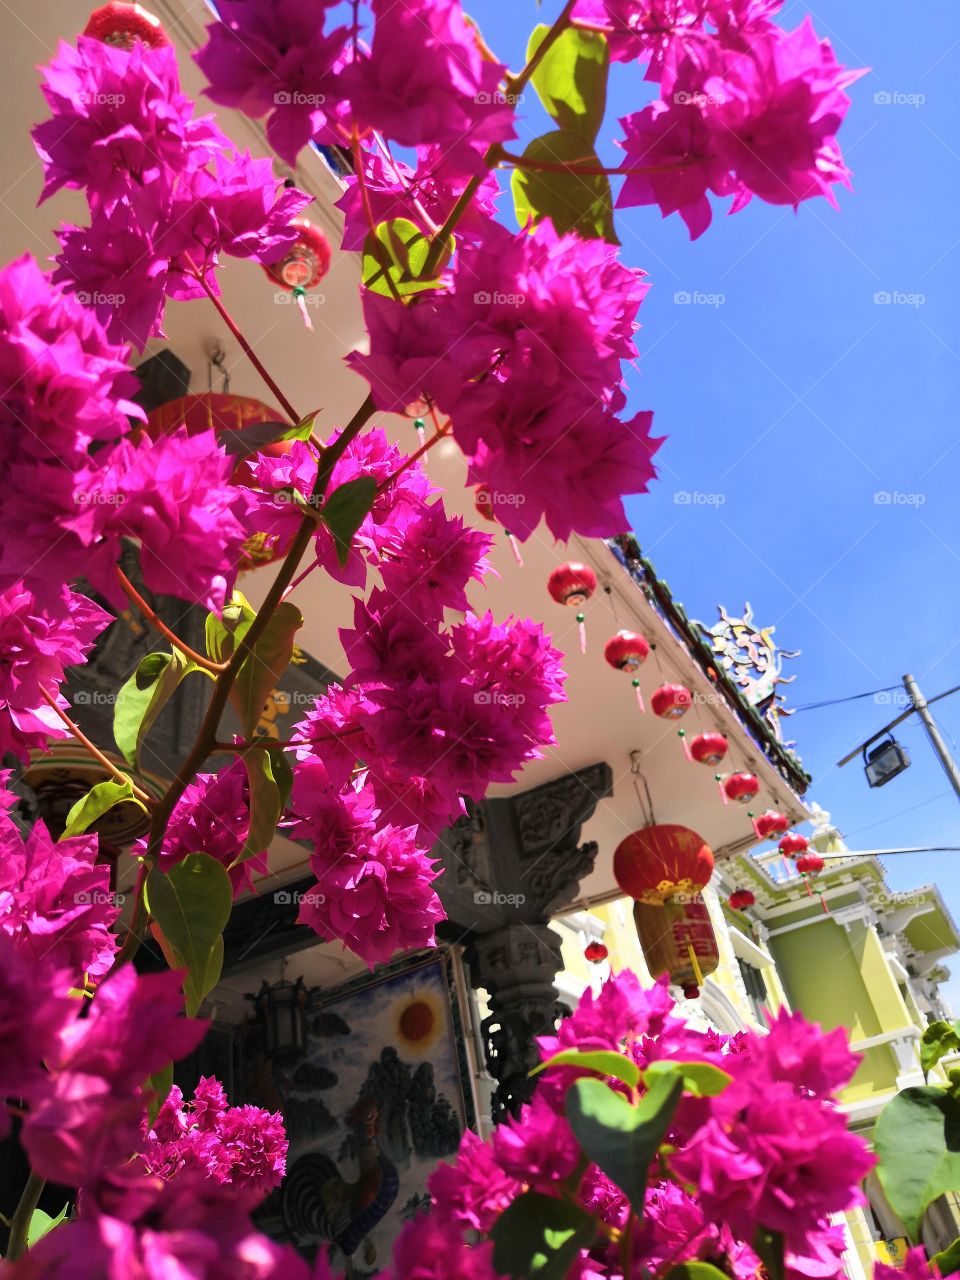 Pink flowers on a tree with traditional Oriental lanterns in the background